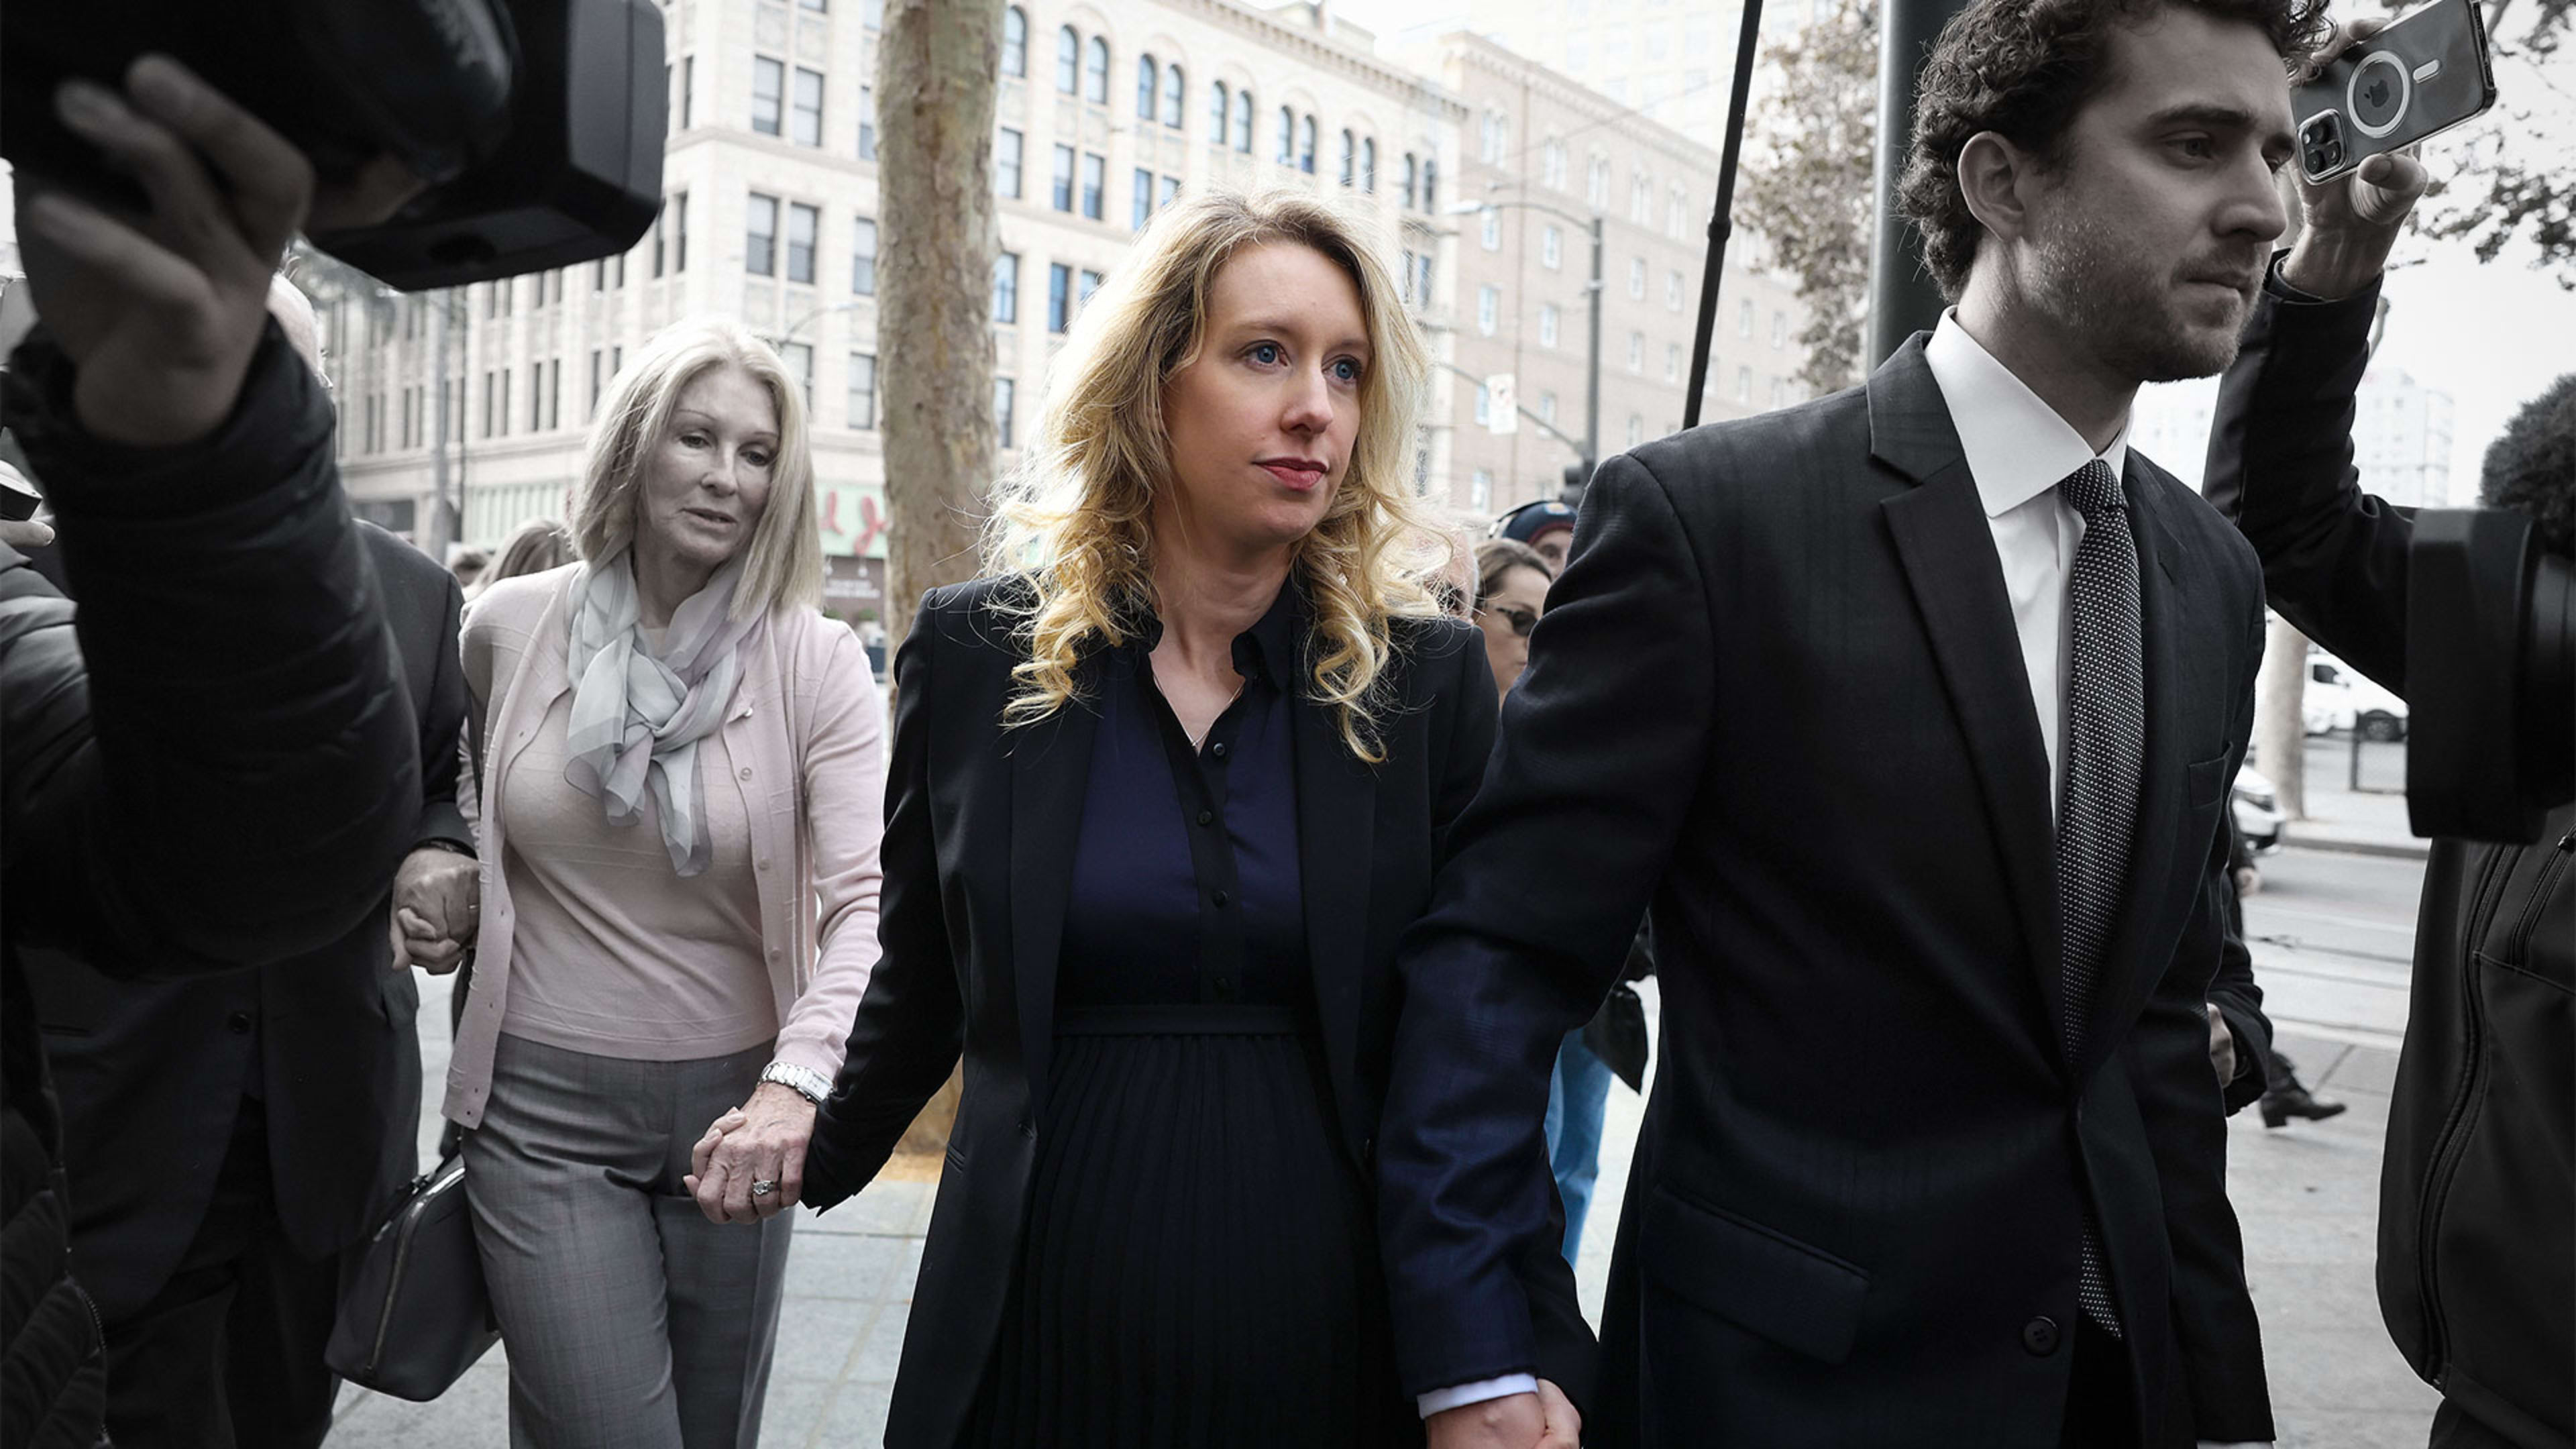 Theranos founder Elizabeth Holmes was just sentenced to more than 11 years in prison